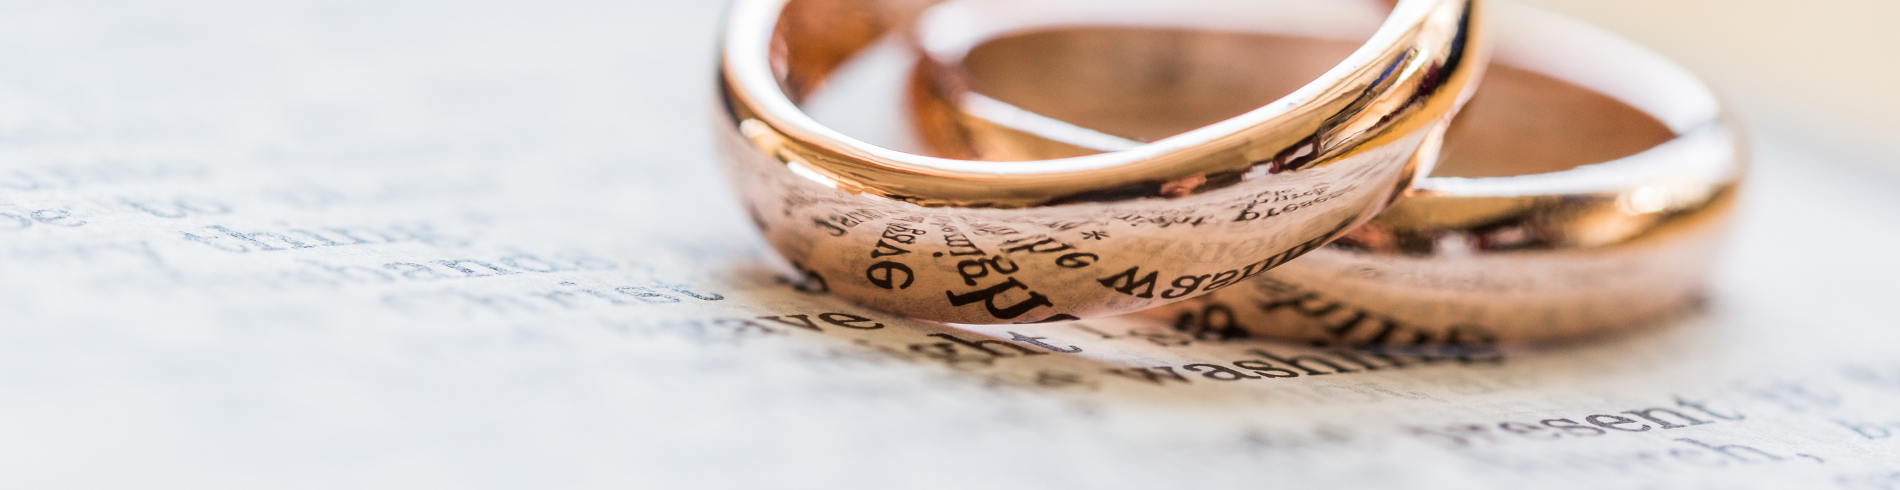 wedding bands on a book